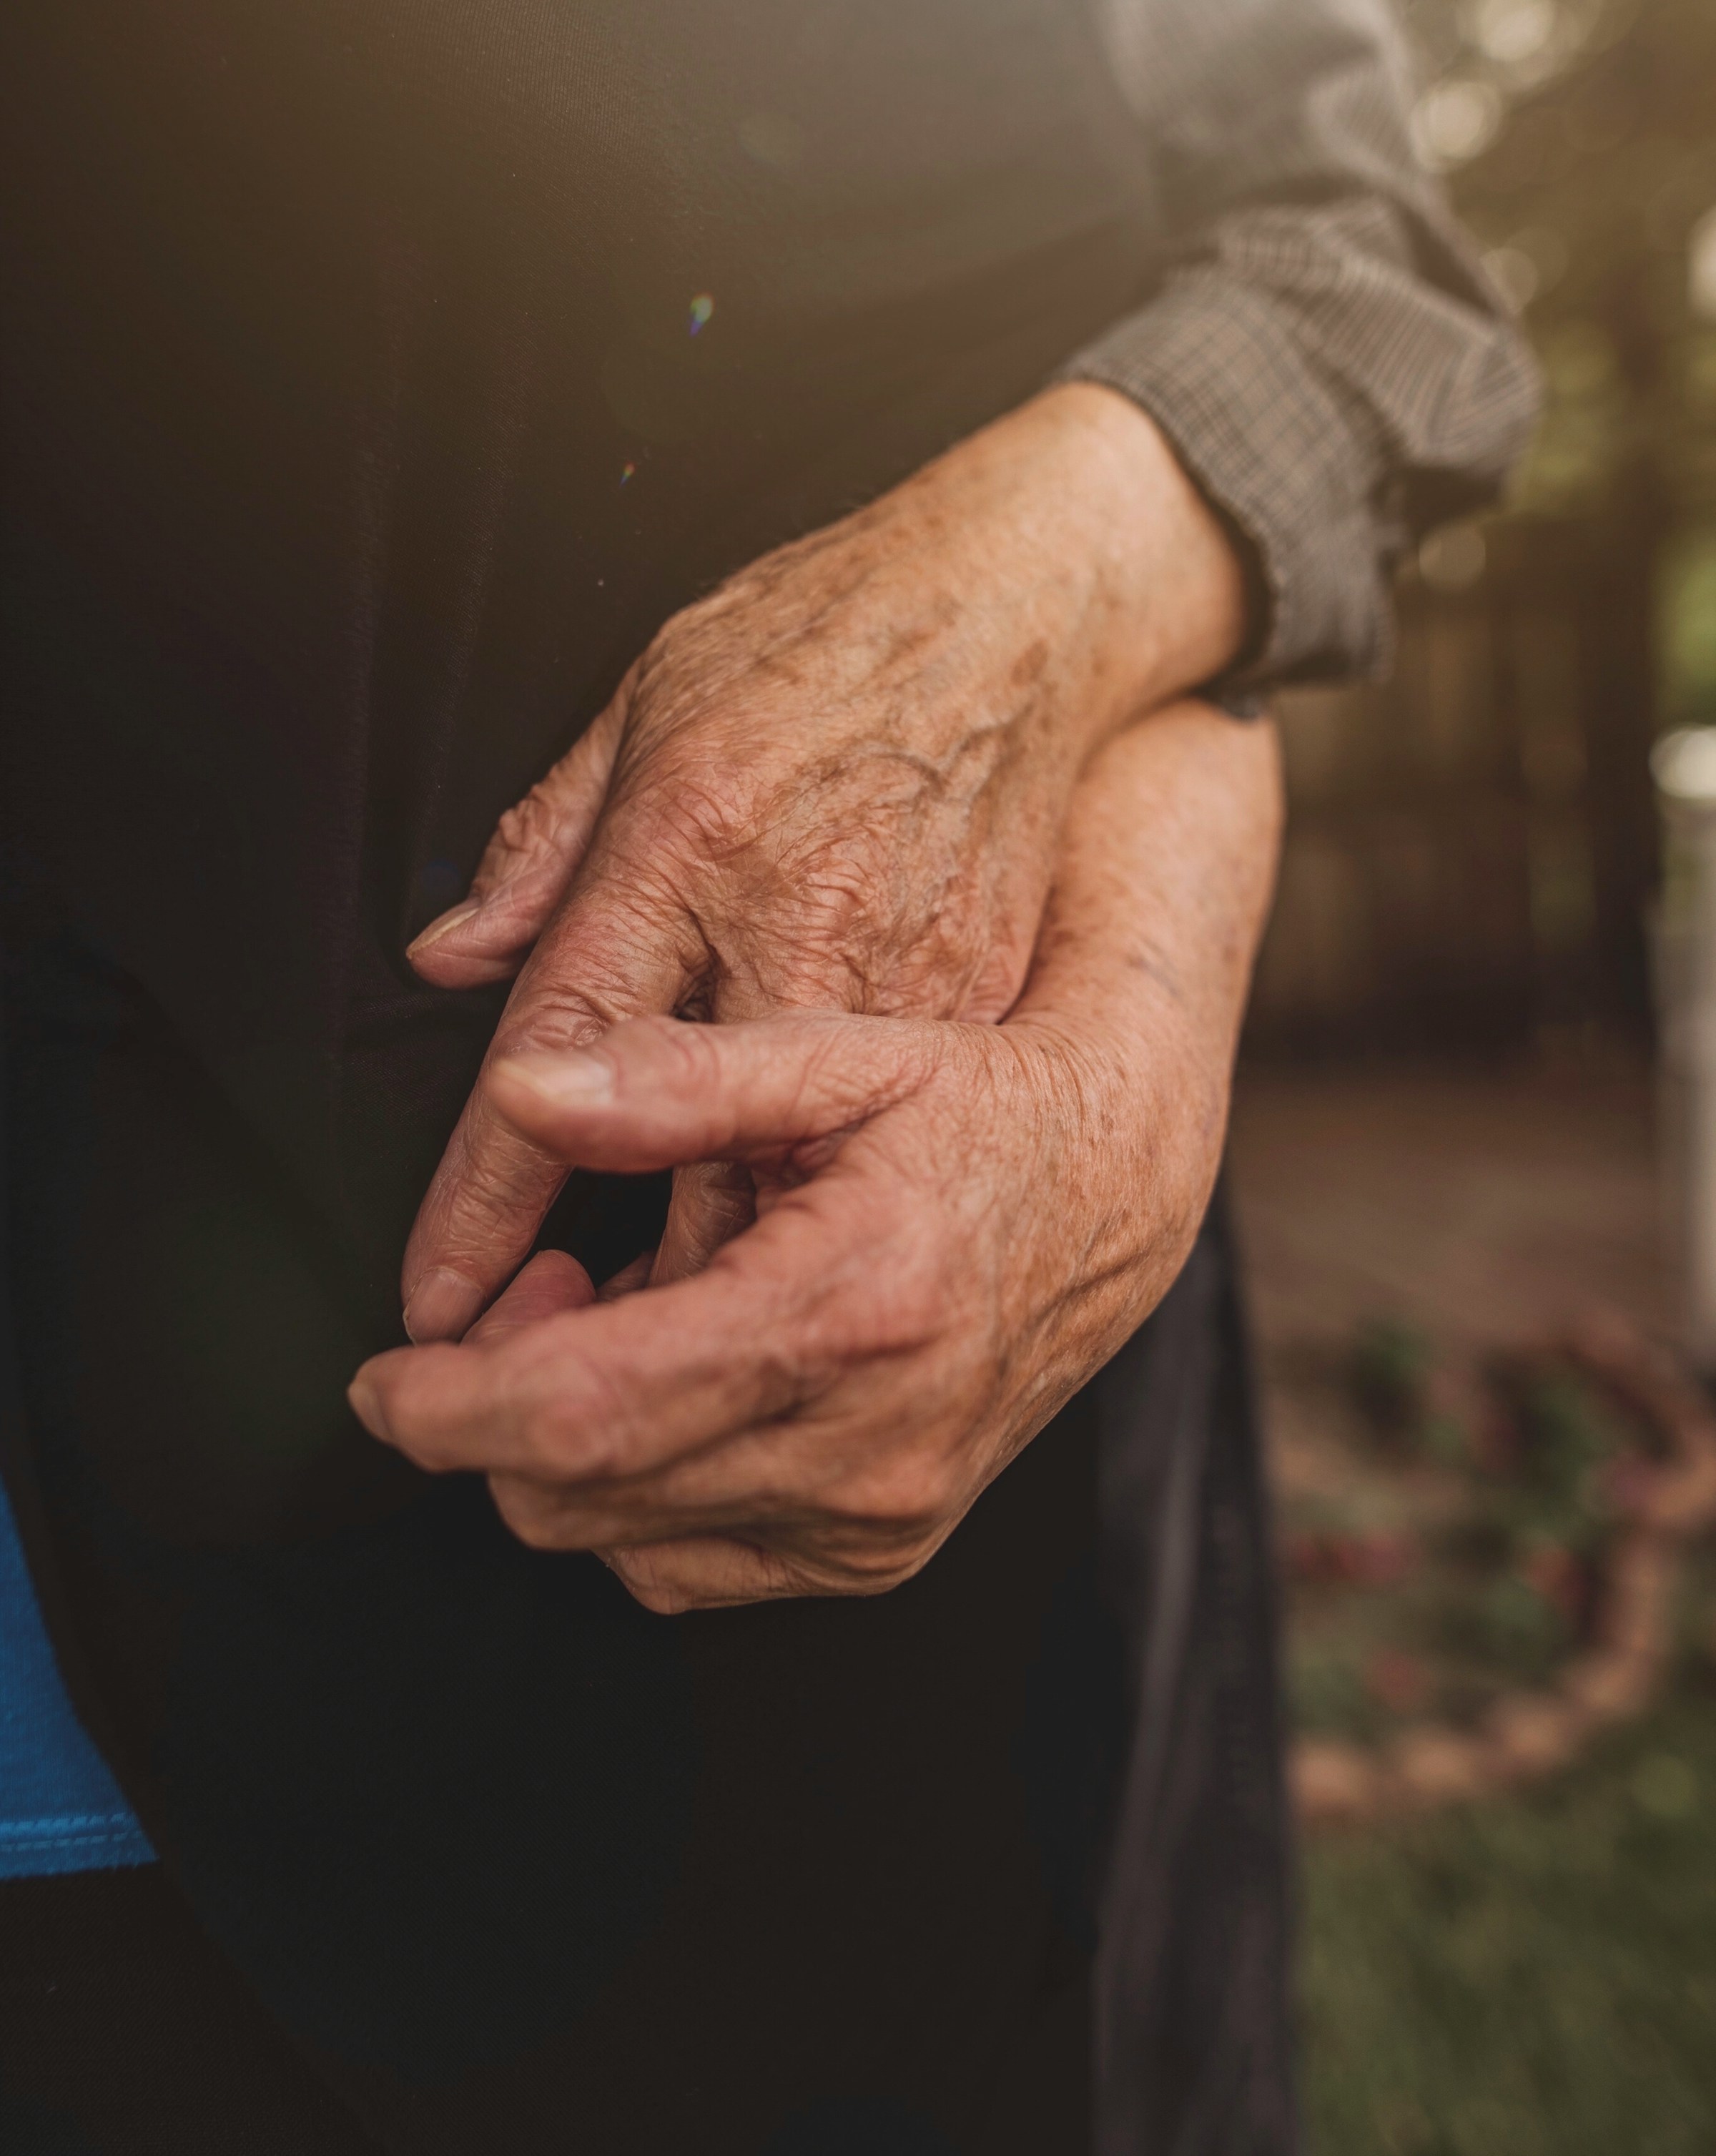 An old couple holding hands | Source: Unsplash